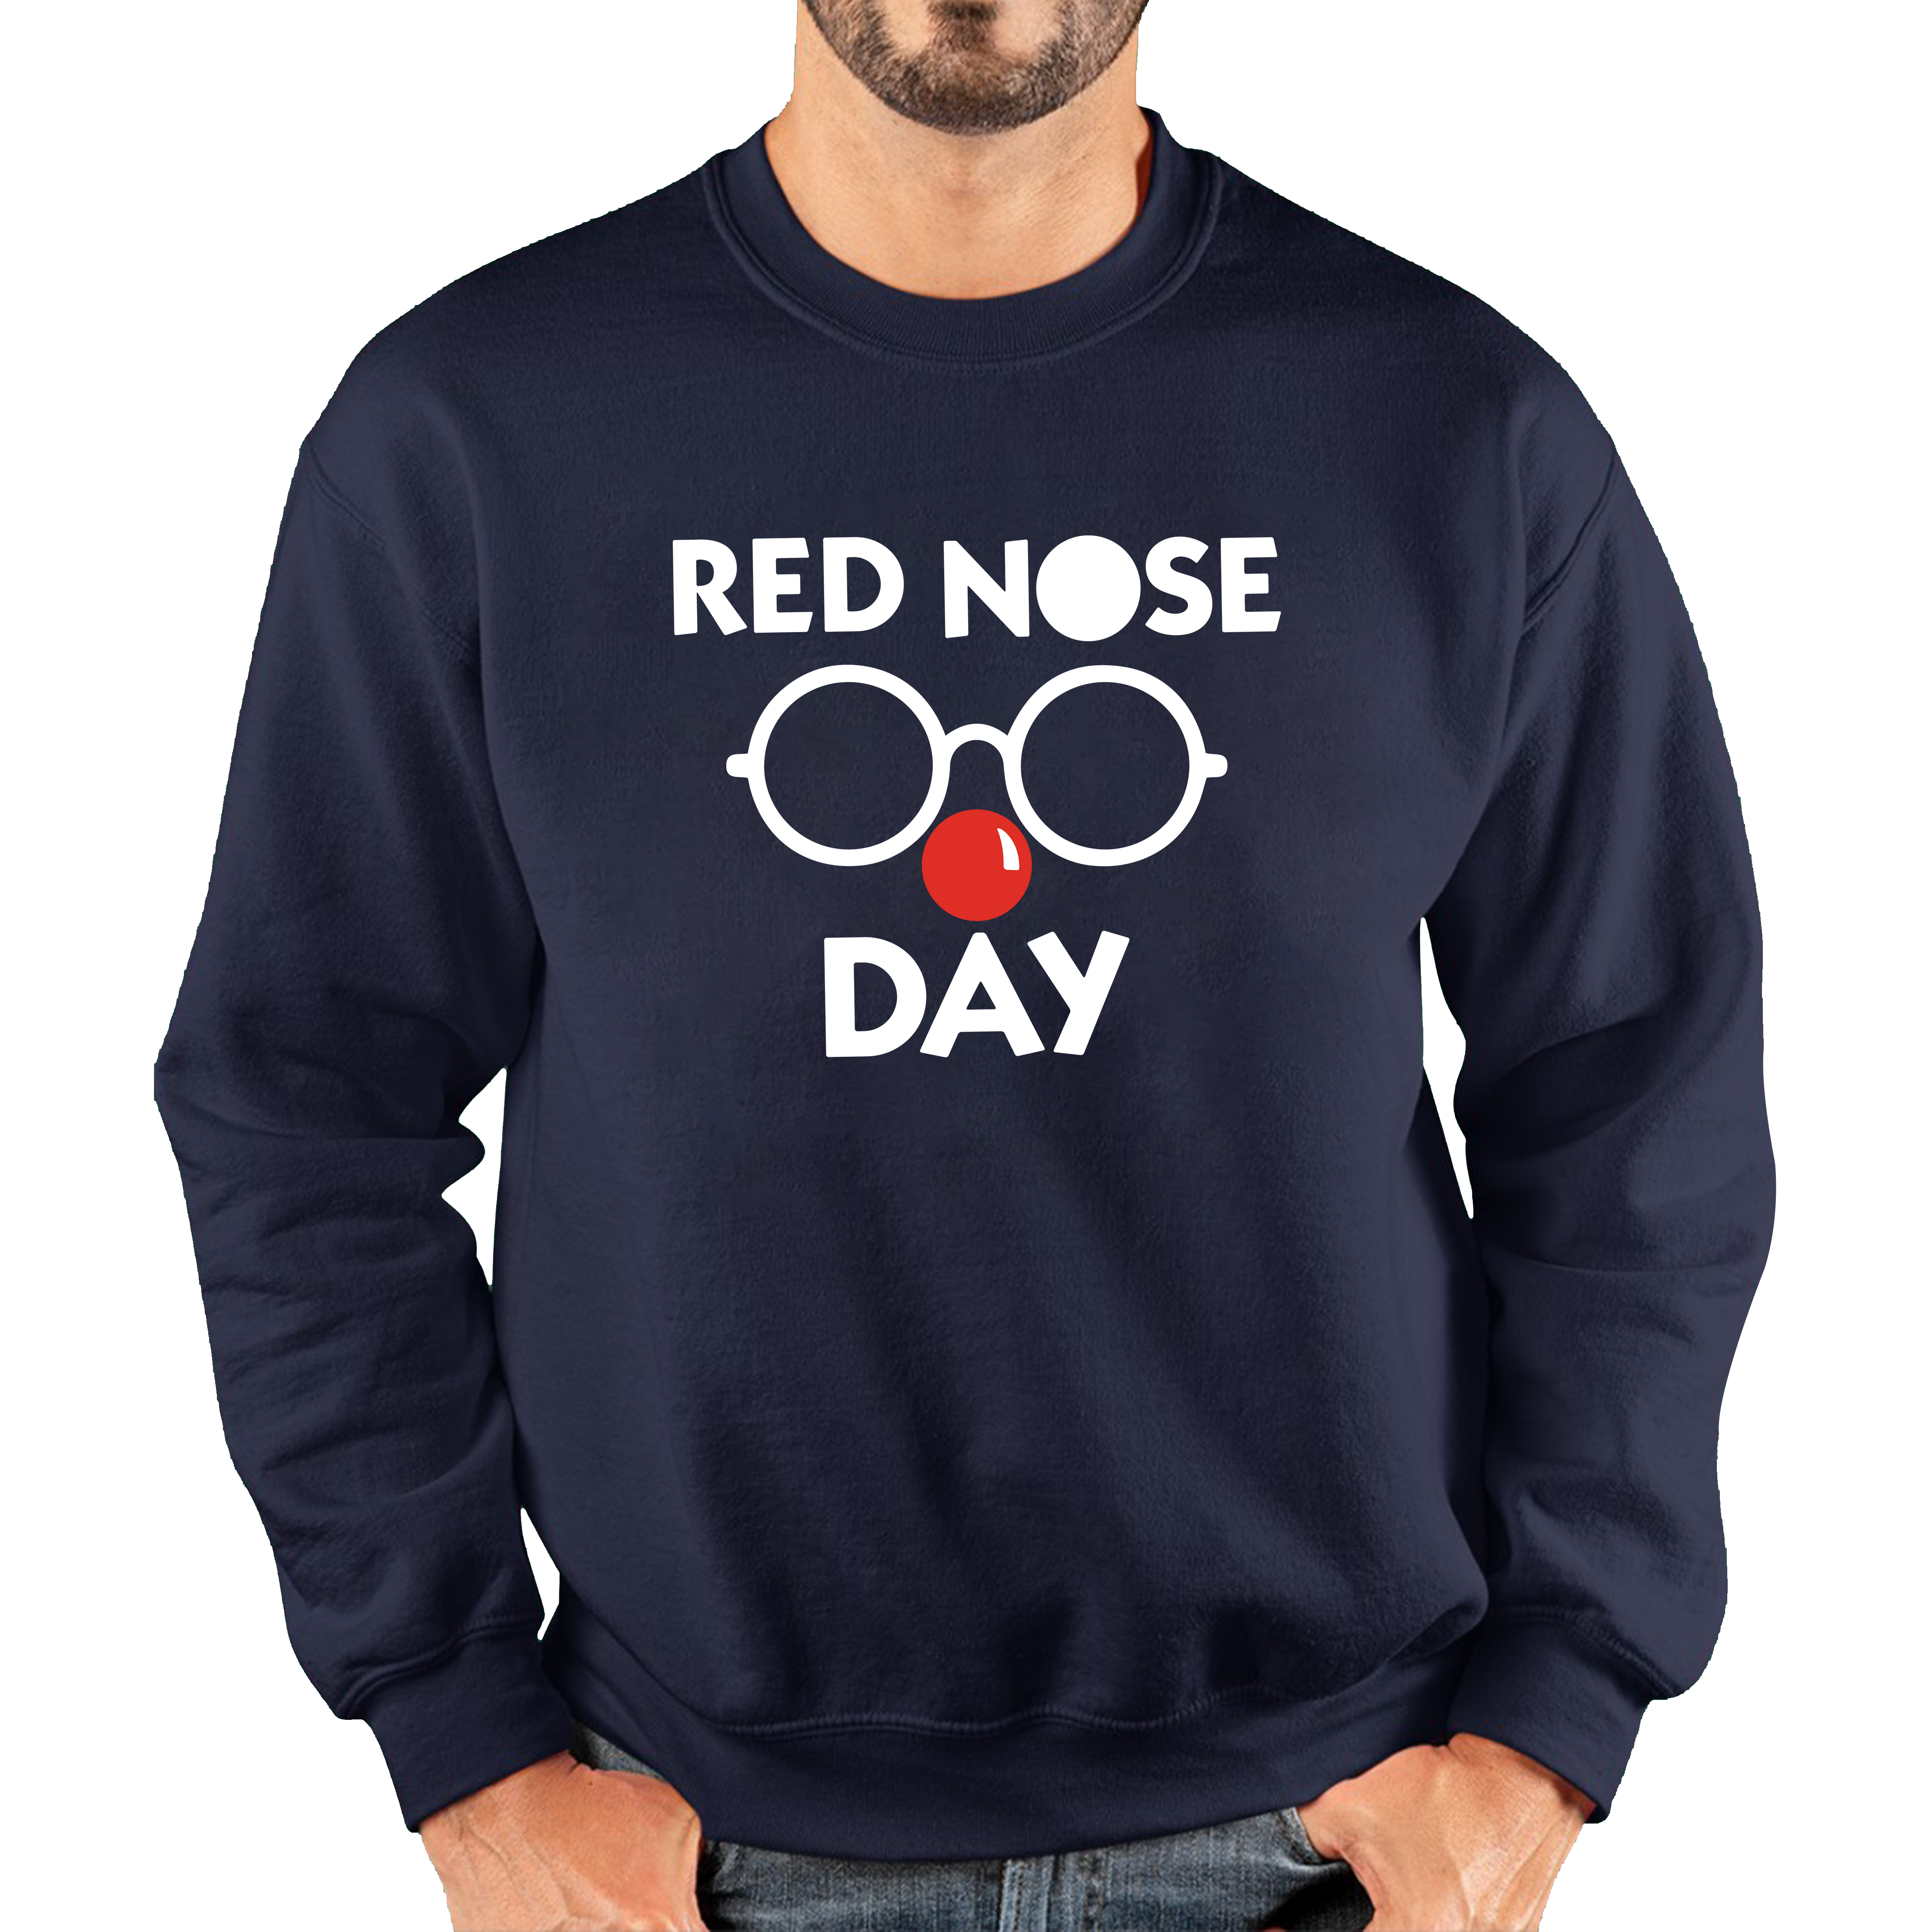 Comic Relief Red Nose Day Adult Sweatshirt. 50% Goes To Charity